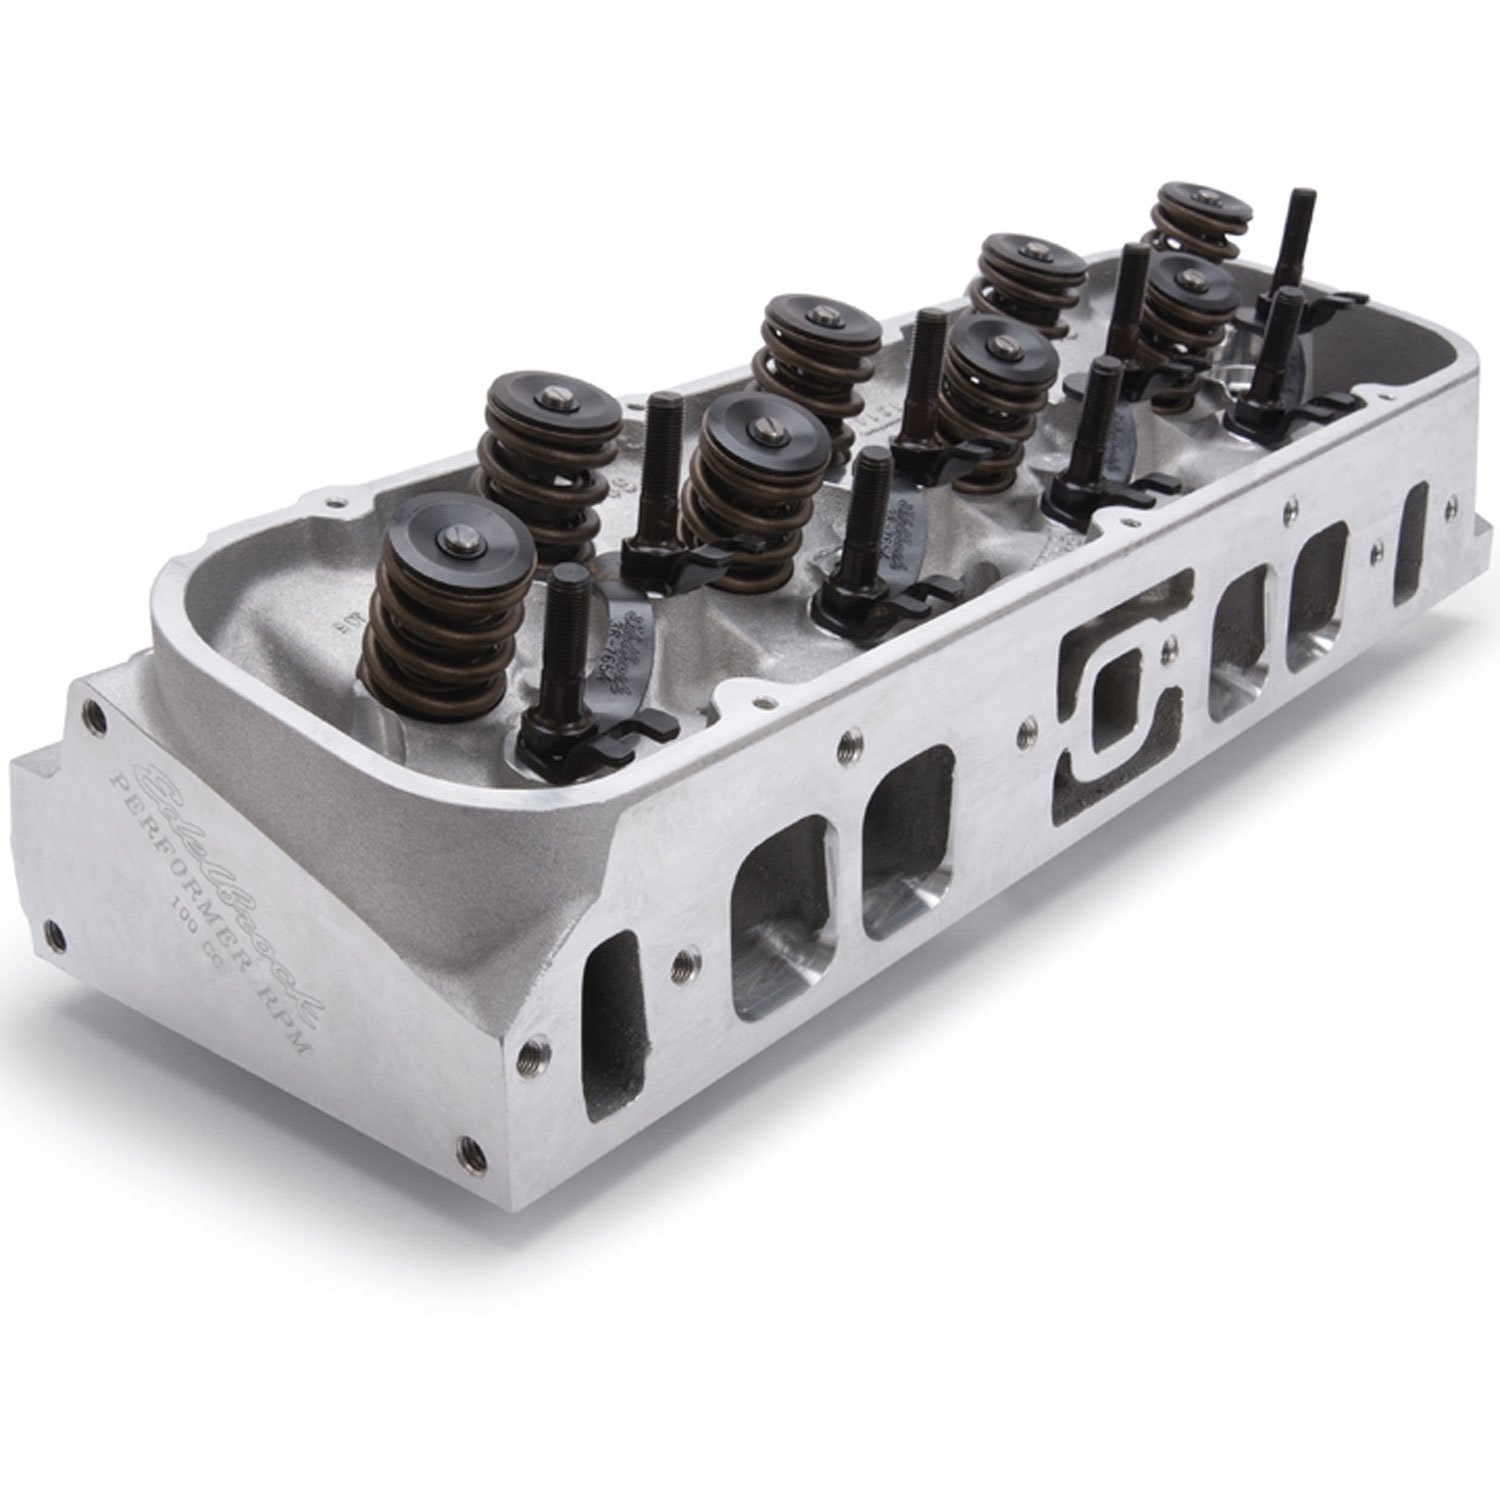 Performer RPM High Compression 454-O Cylinder Heads for